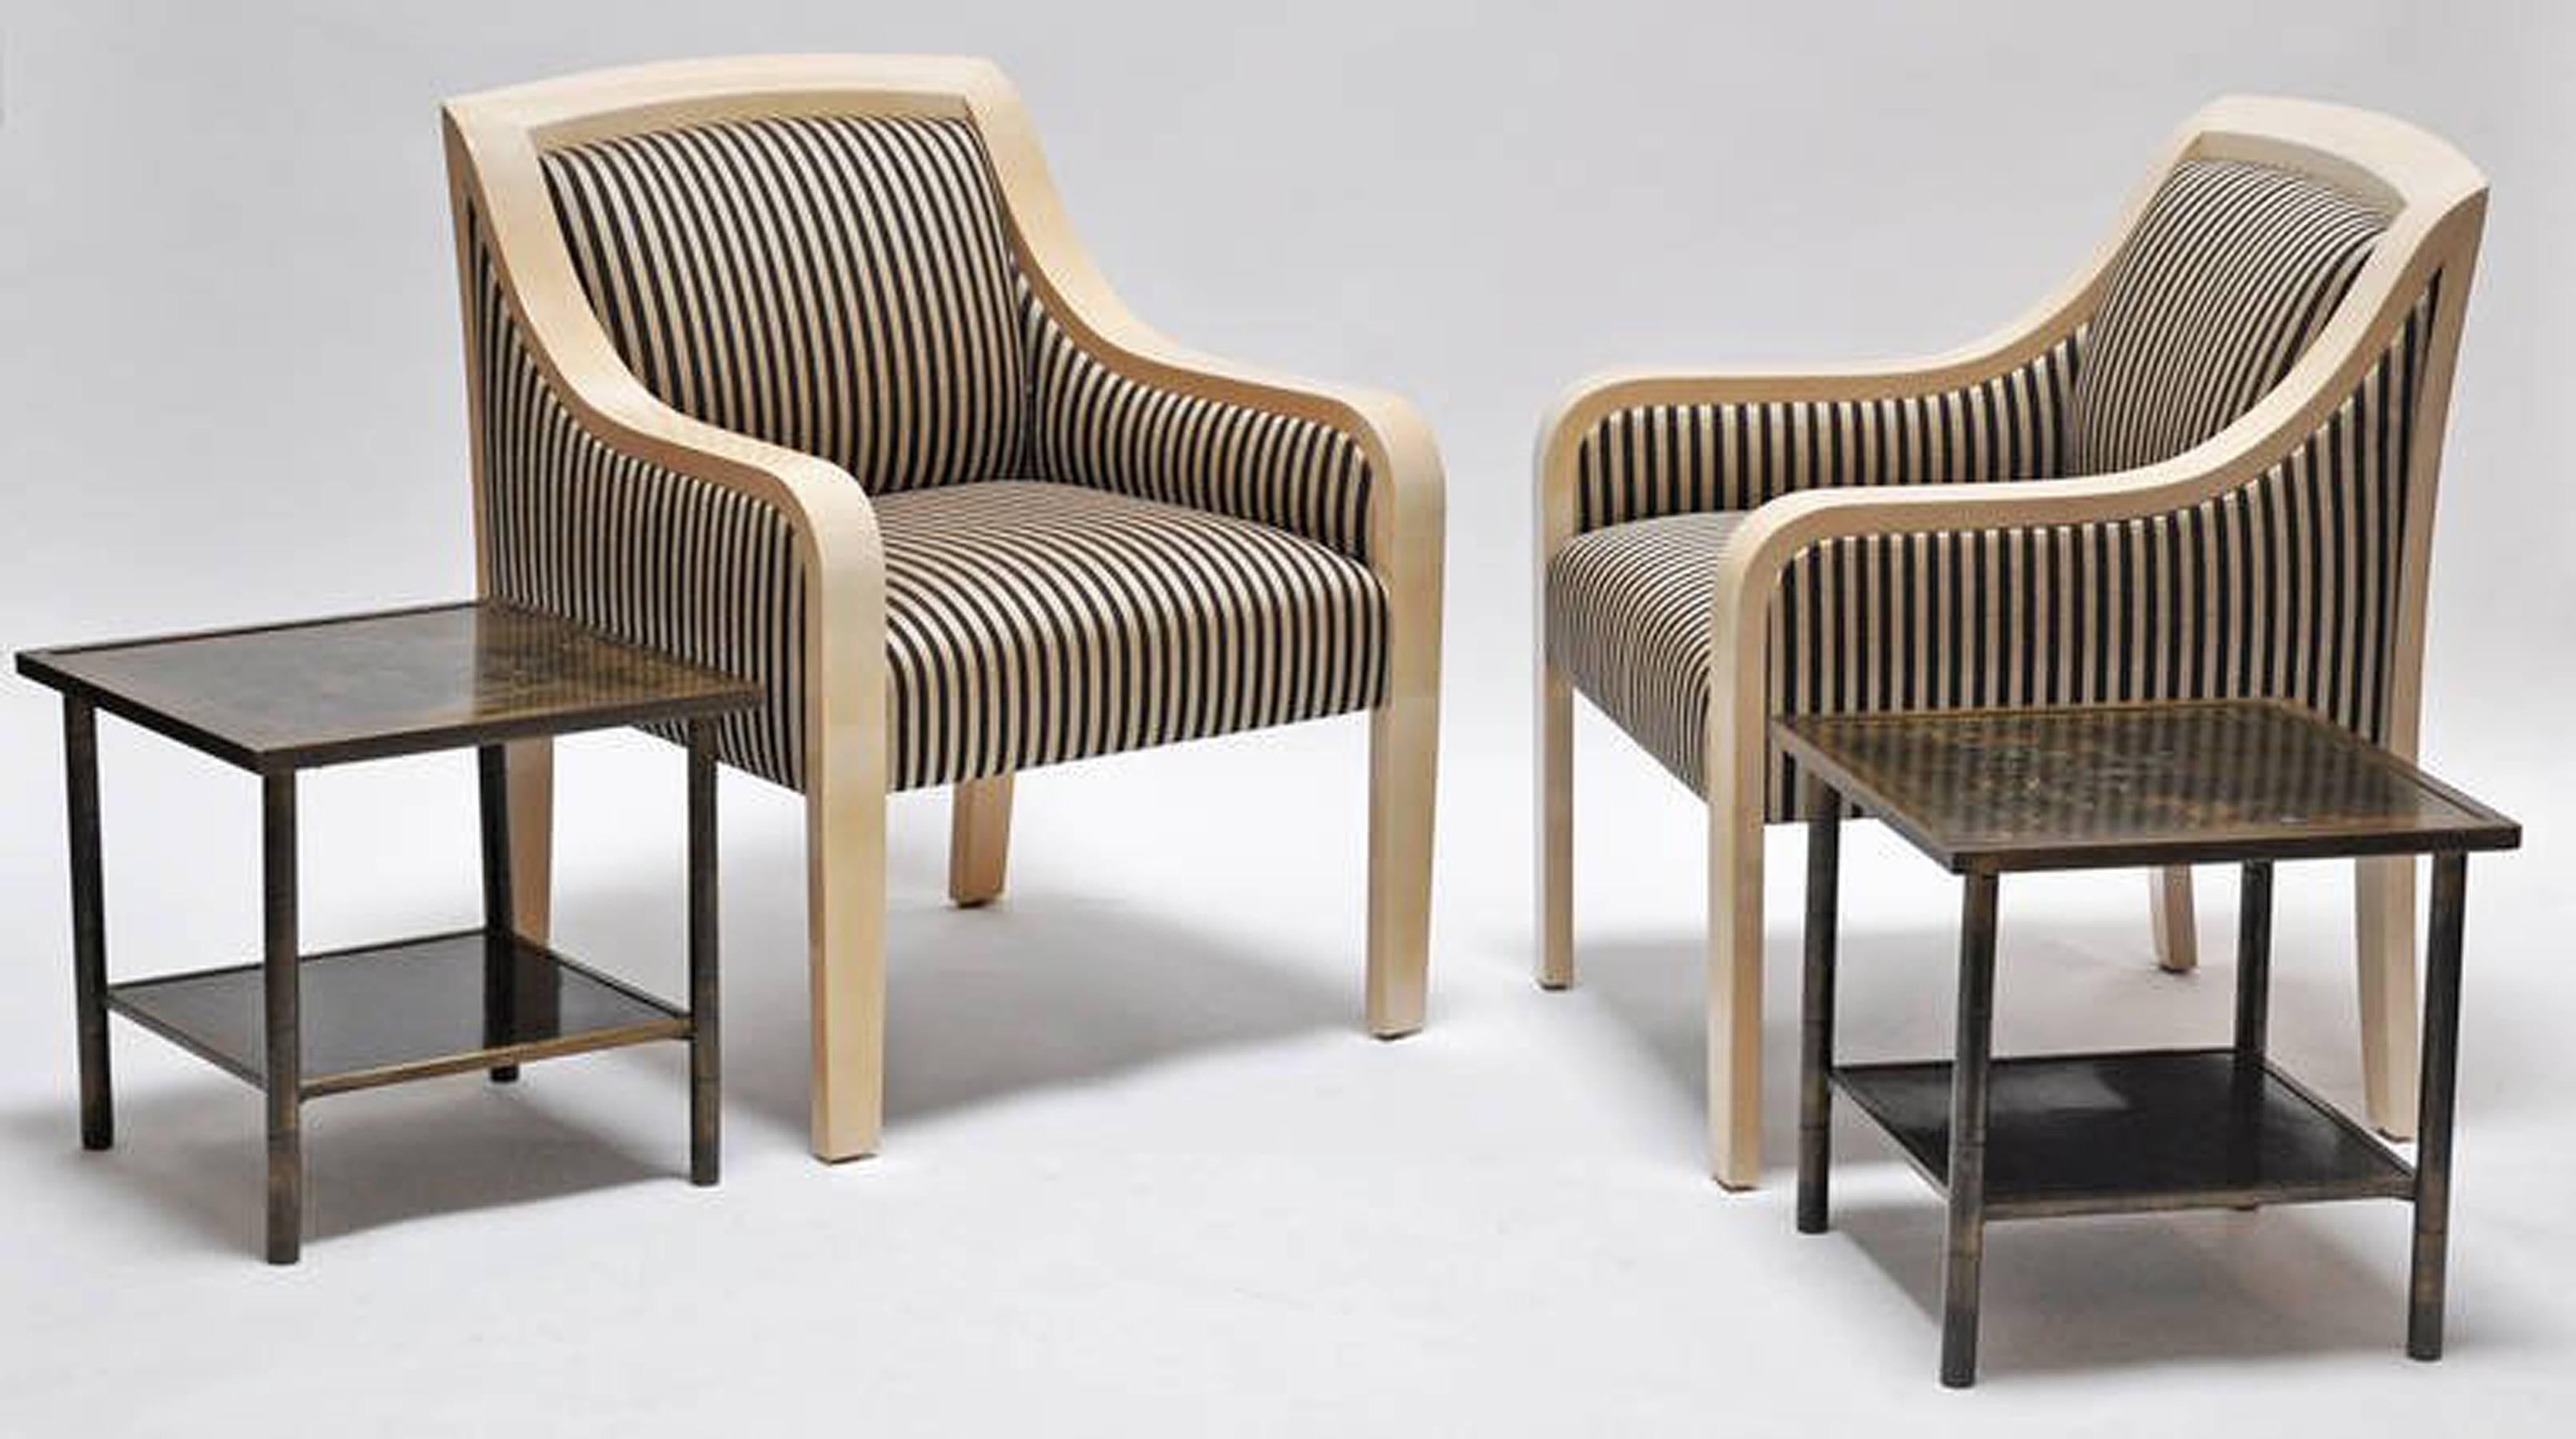 Pair of luxurious lacquered wood and upholstered armchairs. Made by J Robert Scott, designed by Sally Sirken Lewis. Designed for style and comfort. Top quality materials and construction. Price is for the pair.